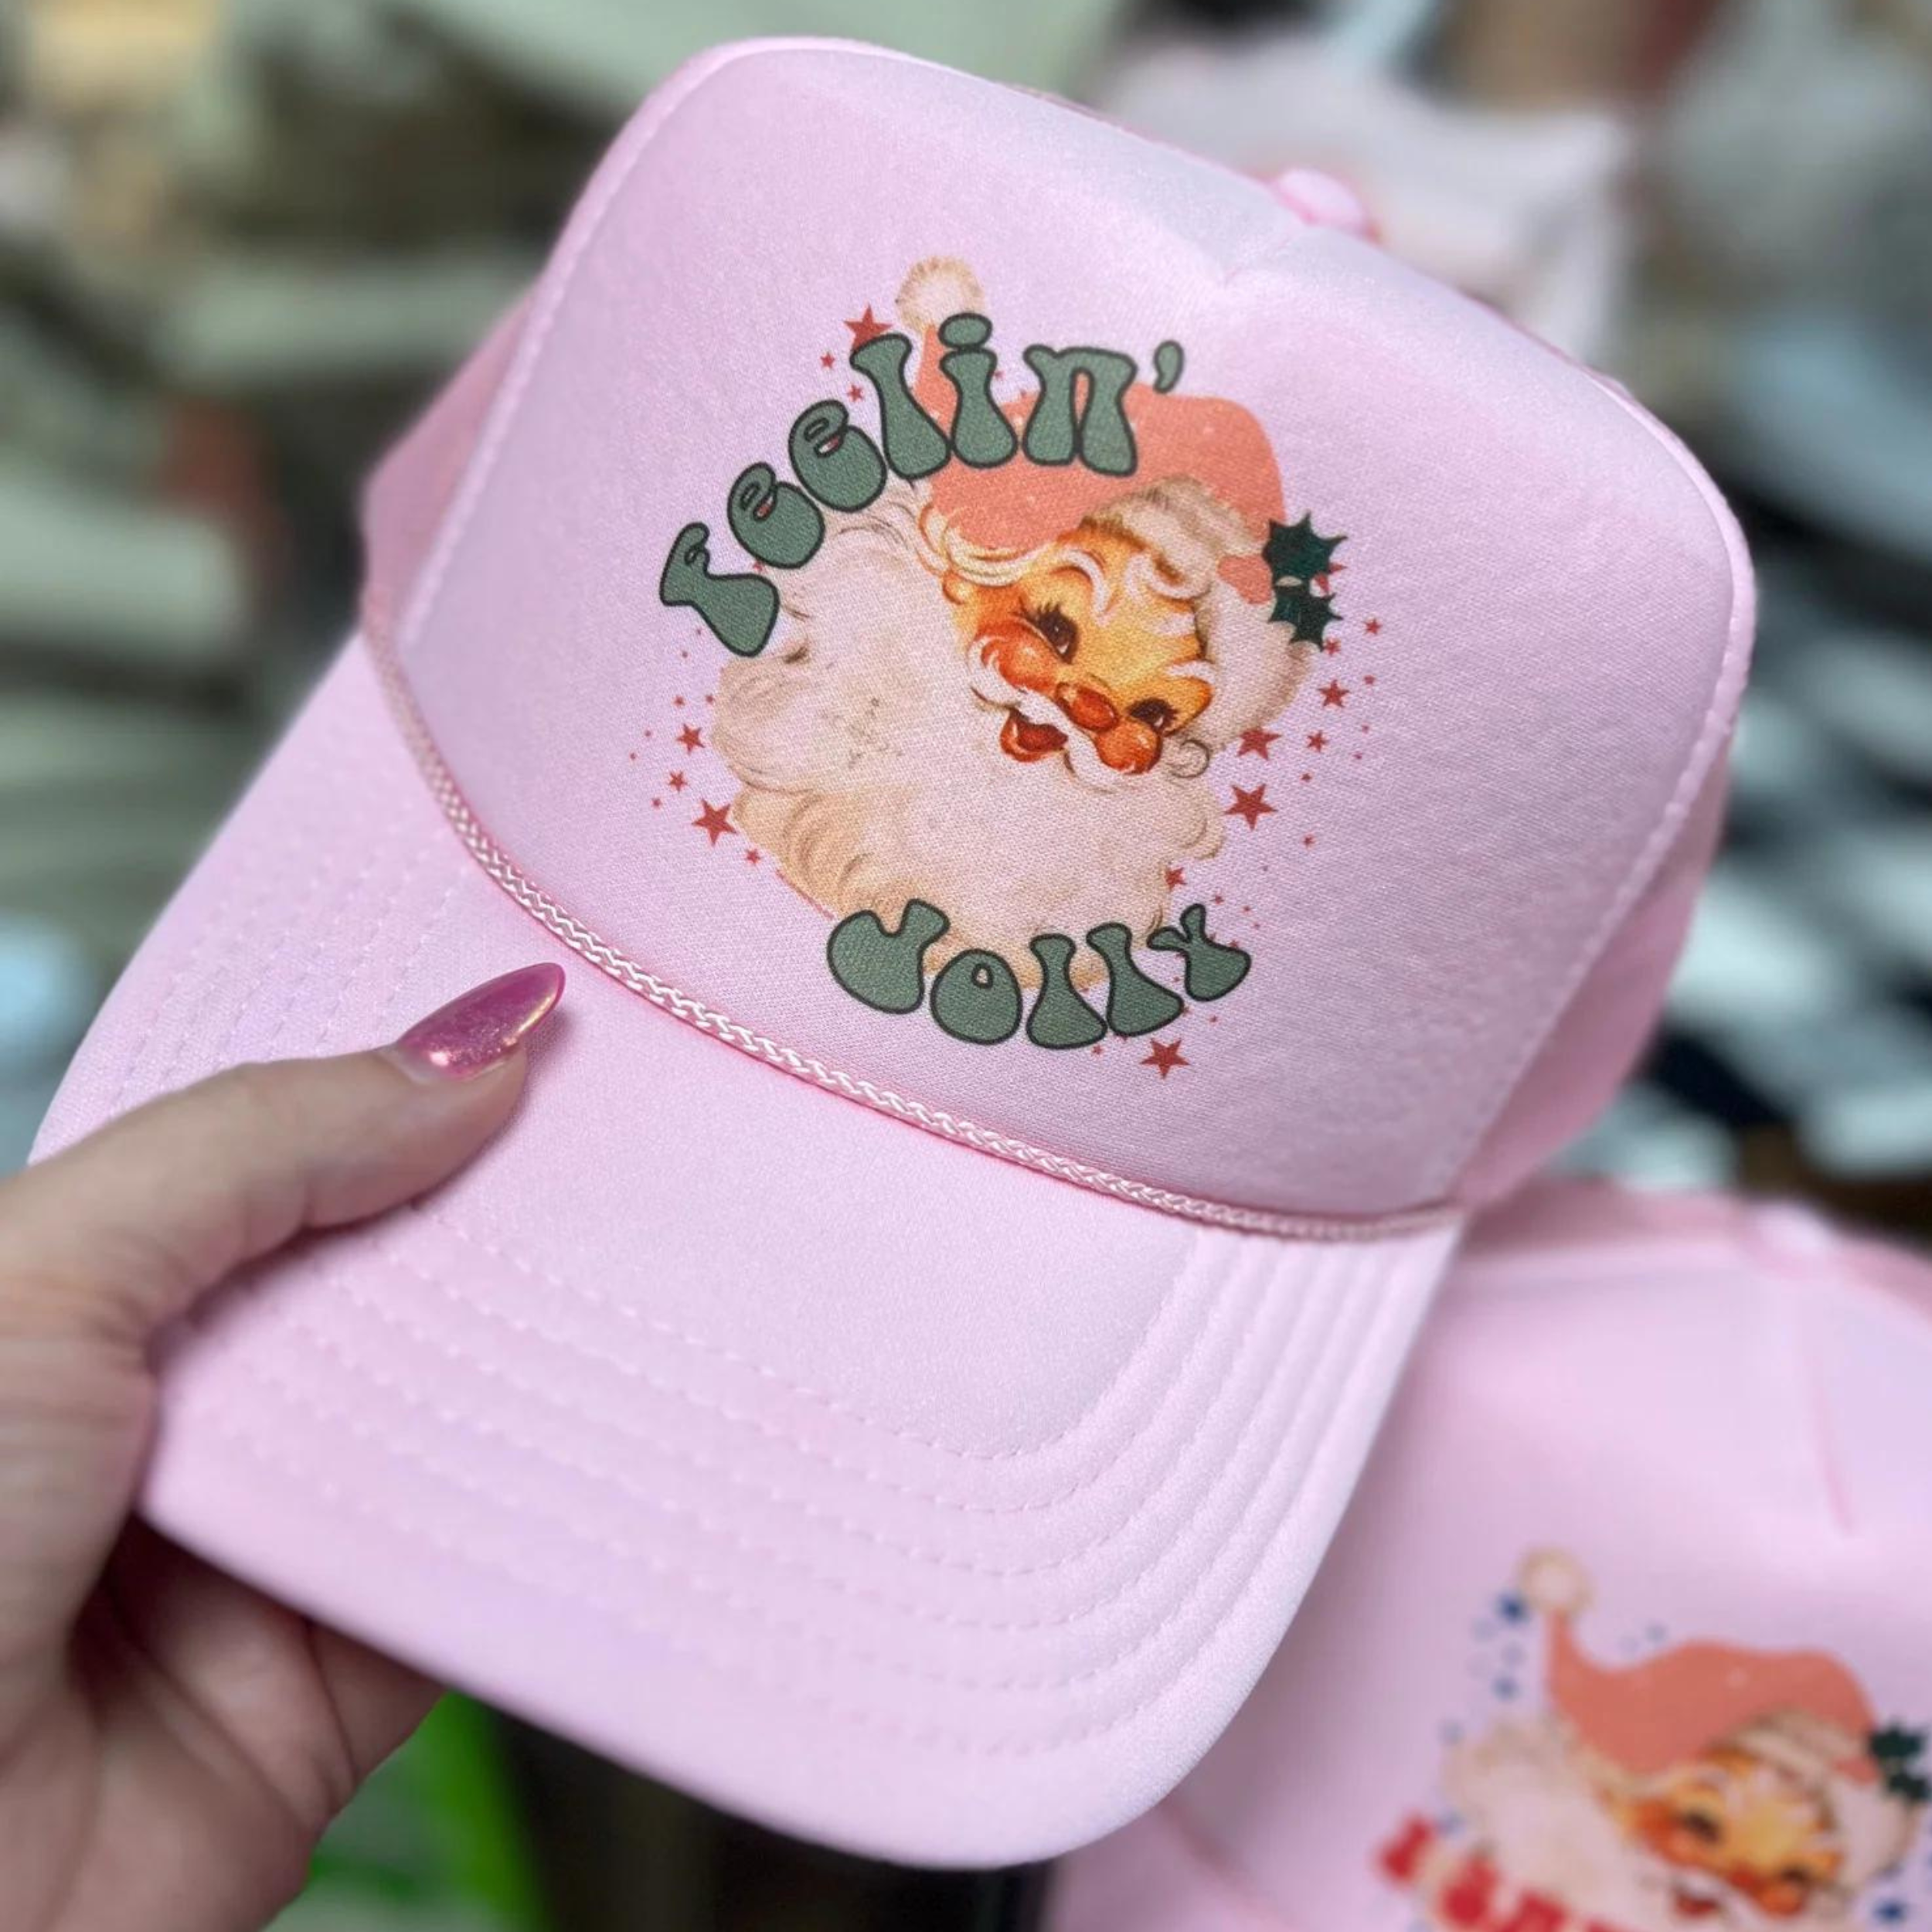 Photo features a light pink trucker hat with the saying "Feelin' Jolly" and a picture of Santa on the front.